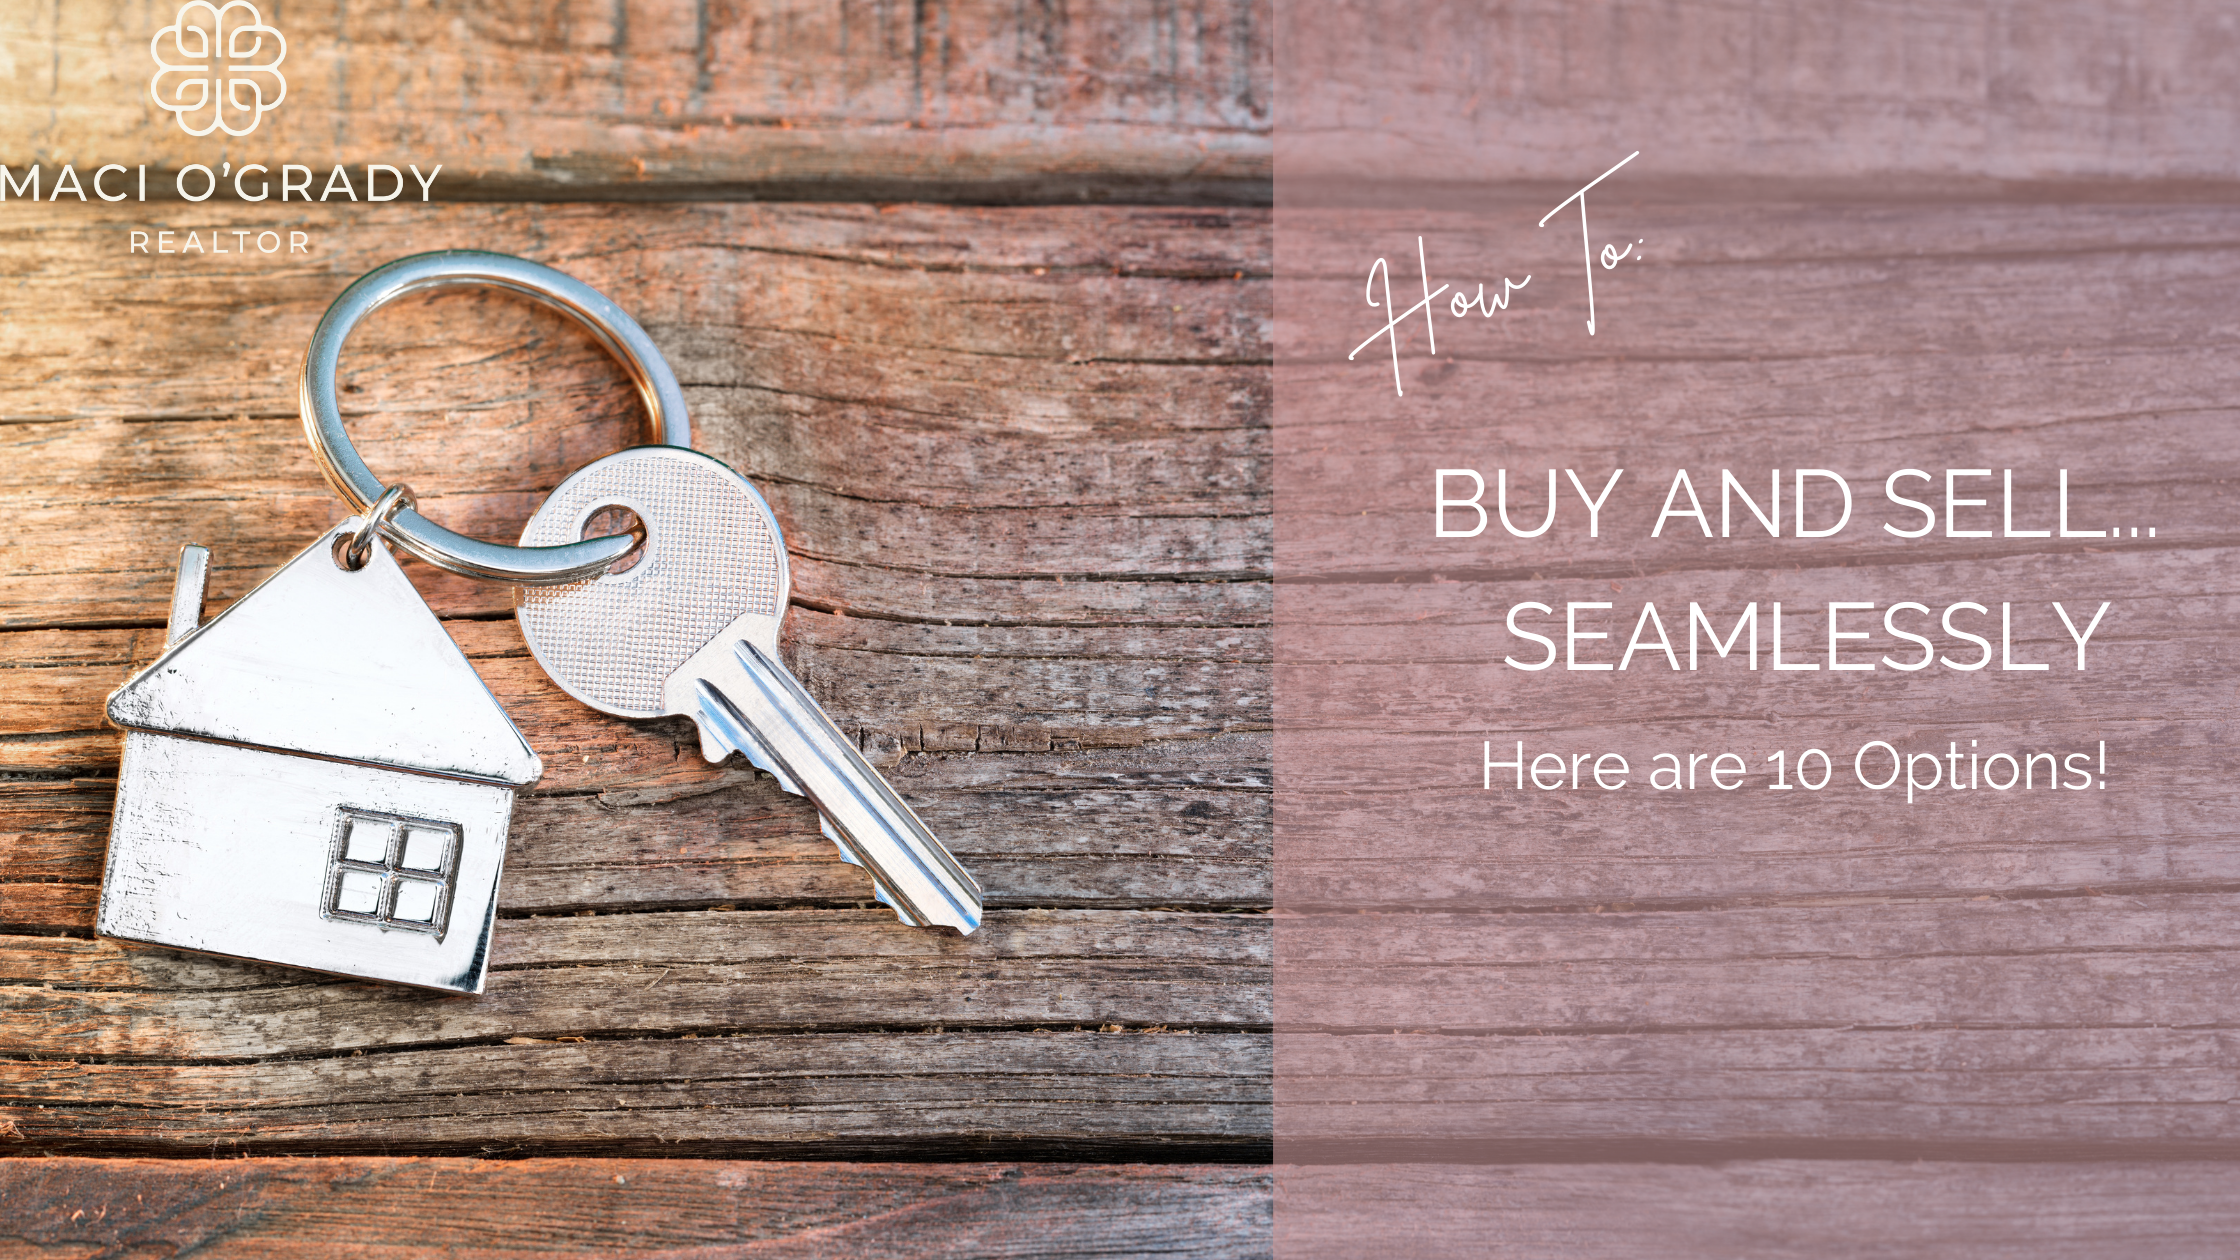 How to buy and sell seamlessly